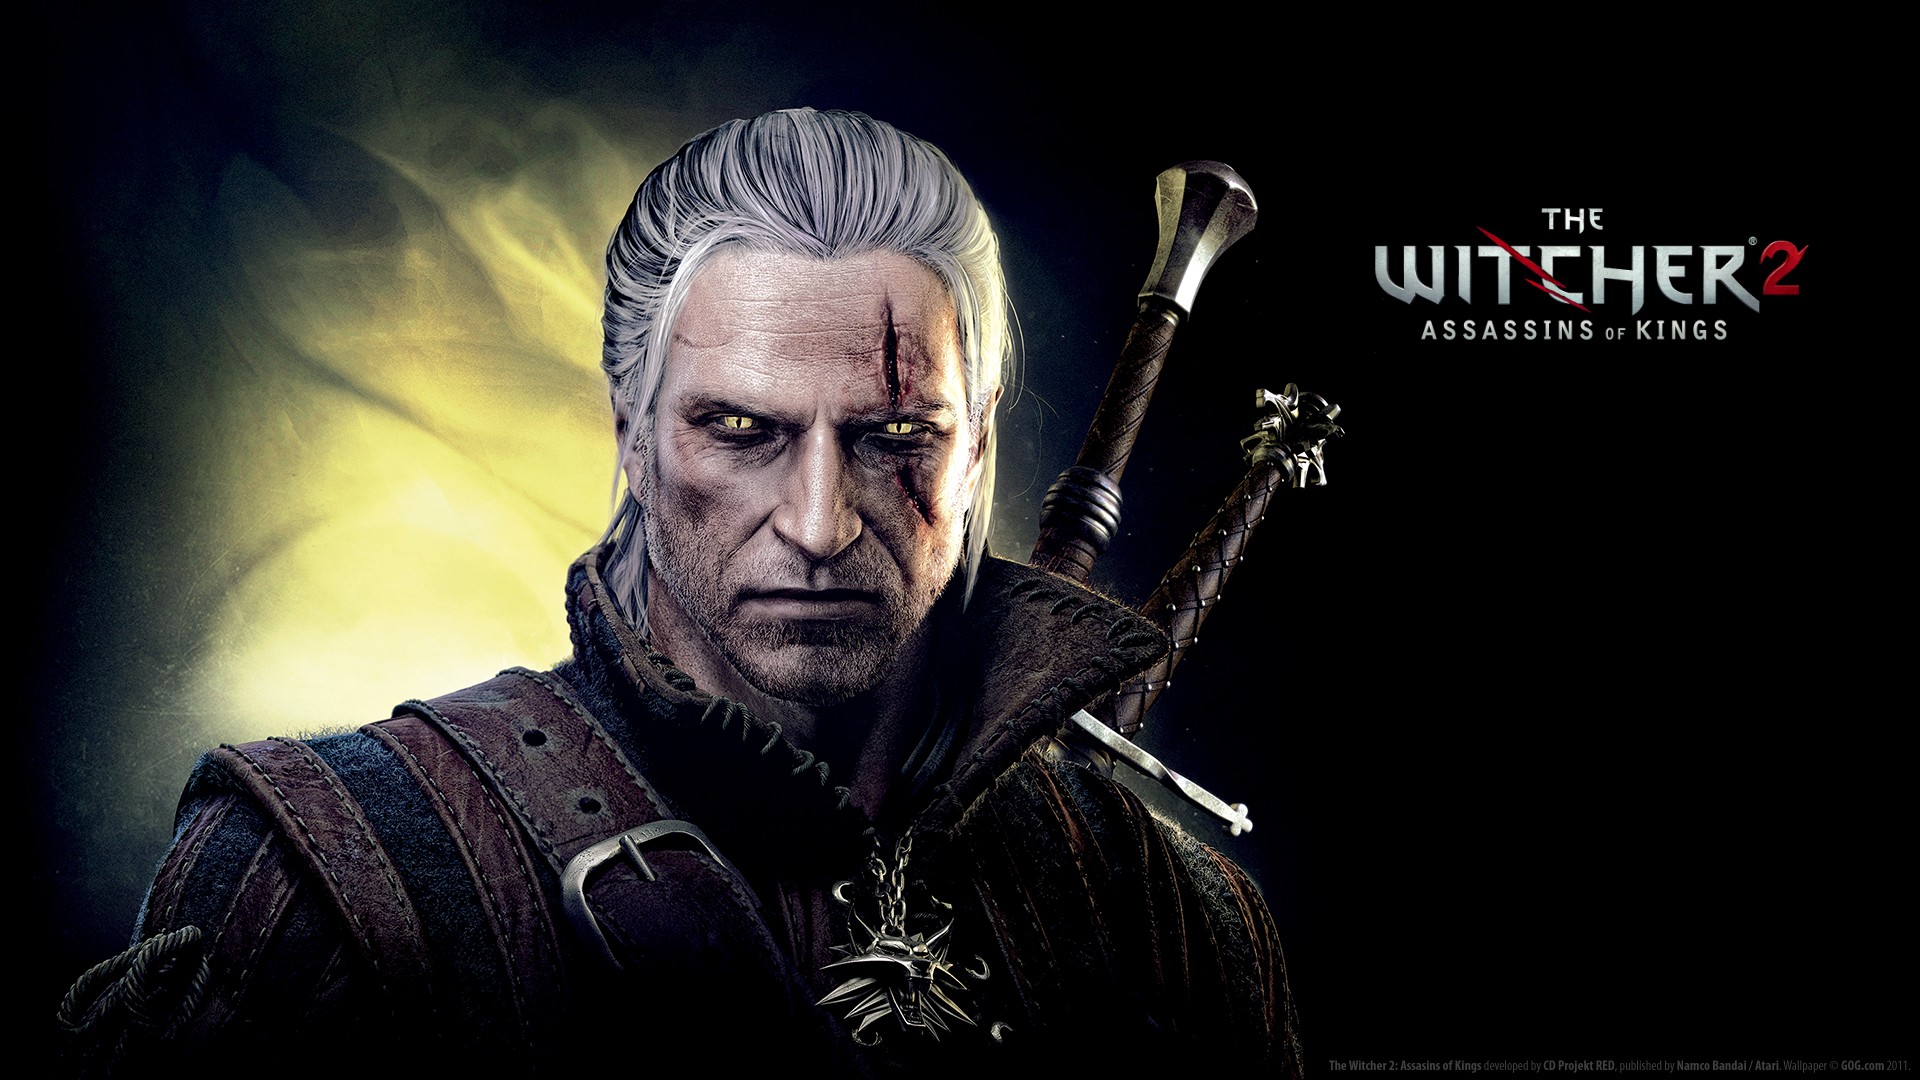 General 1920x1080 The Witcher 2: Assassins of Kings Geralt of Rivia Video Game Heroes CD Projekt RED video game men video games PC gaming video game art